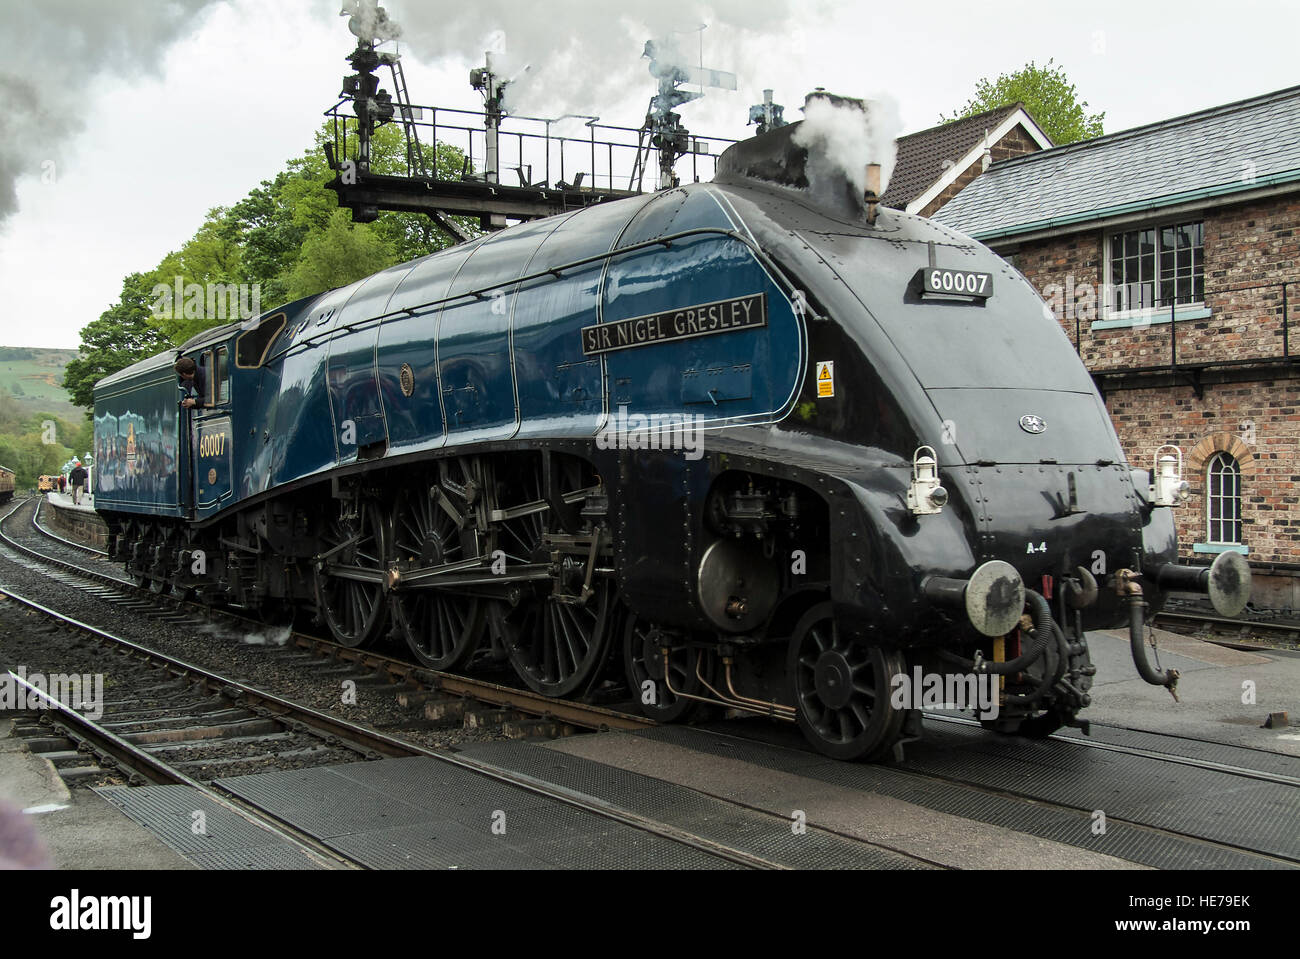 A4 Pacific loco #60007 Sir Nigel Gresley standing at Grosmont station on the North York Moors railway, Yorkshire, England UK Stock Photo